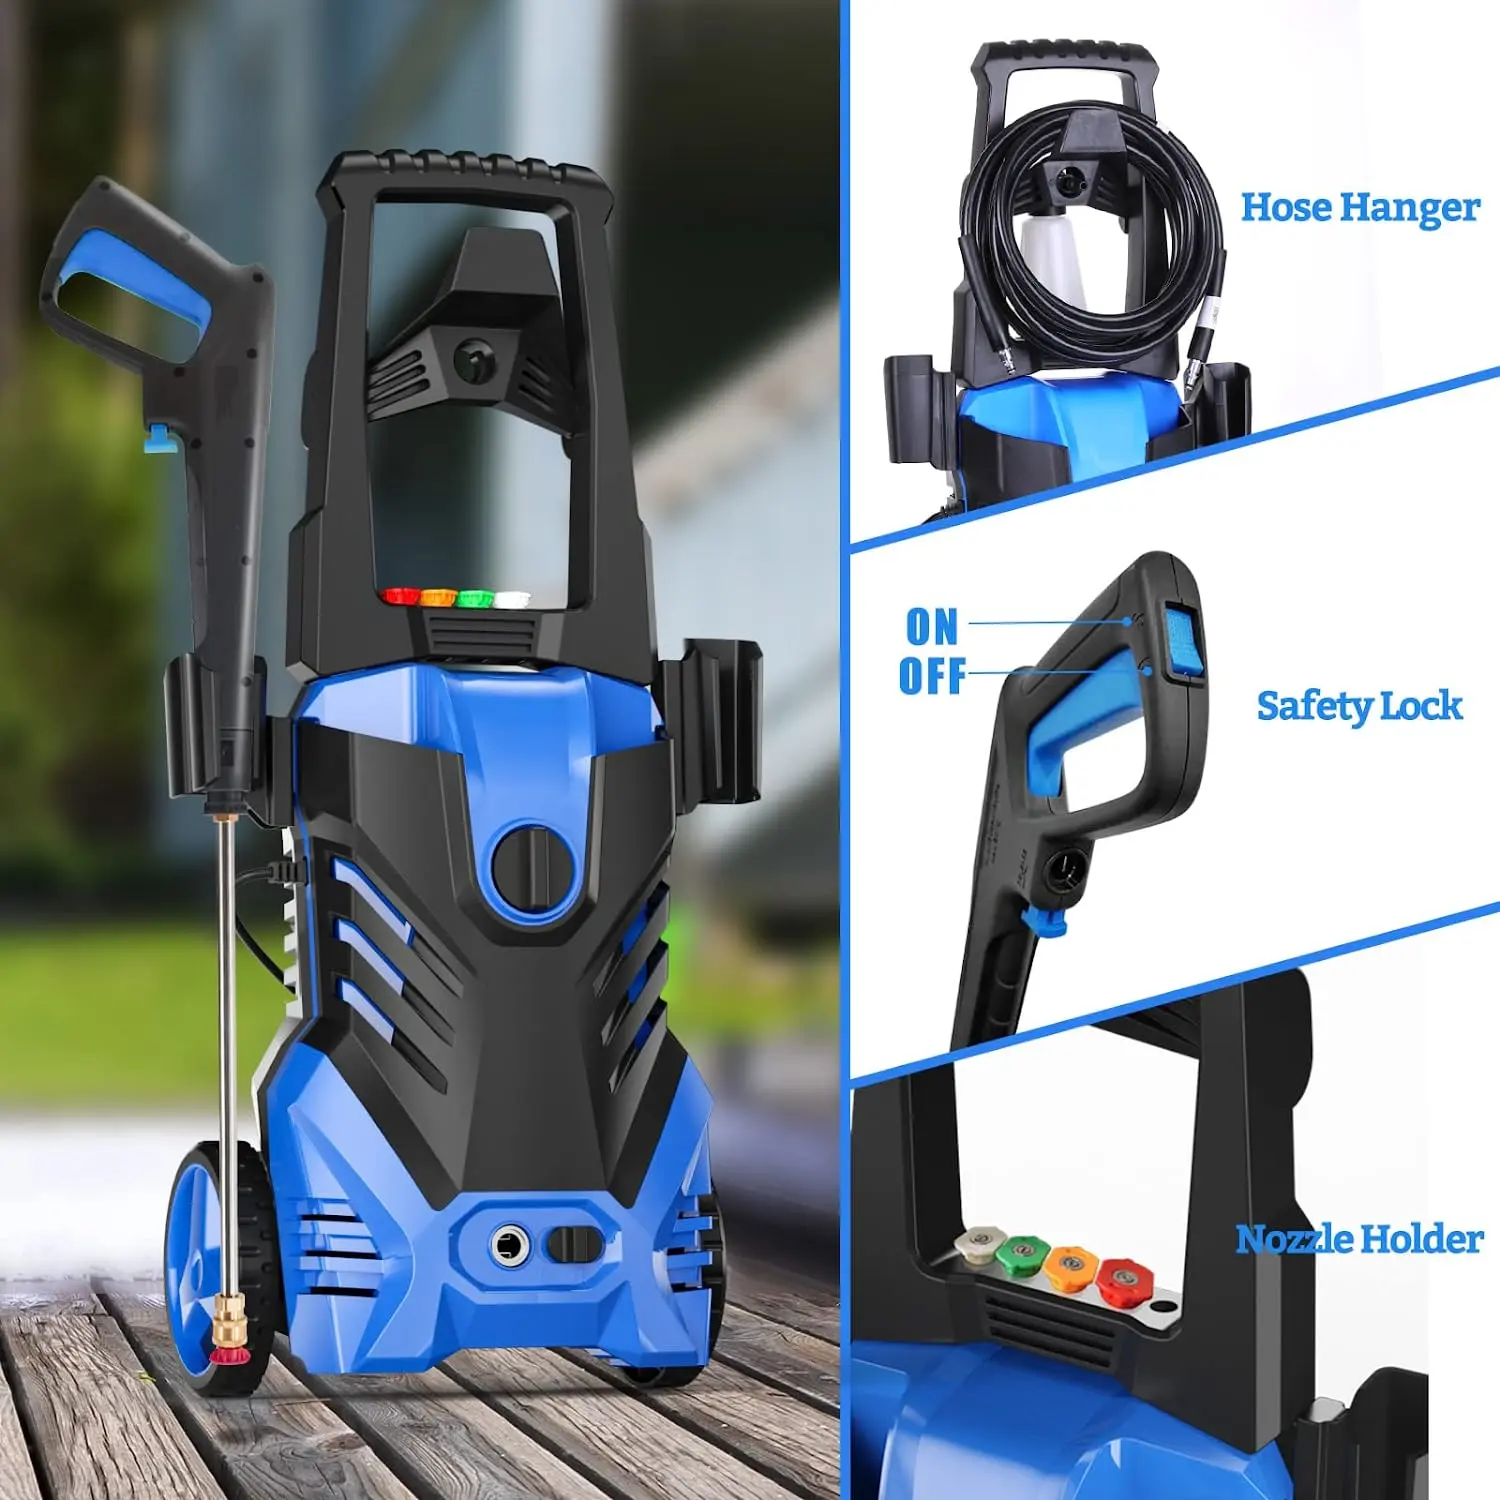 EVEAGE Powerful Electric Pressure Washer – 3500 PSI 2.5 GPM Electric Power Washer